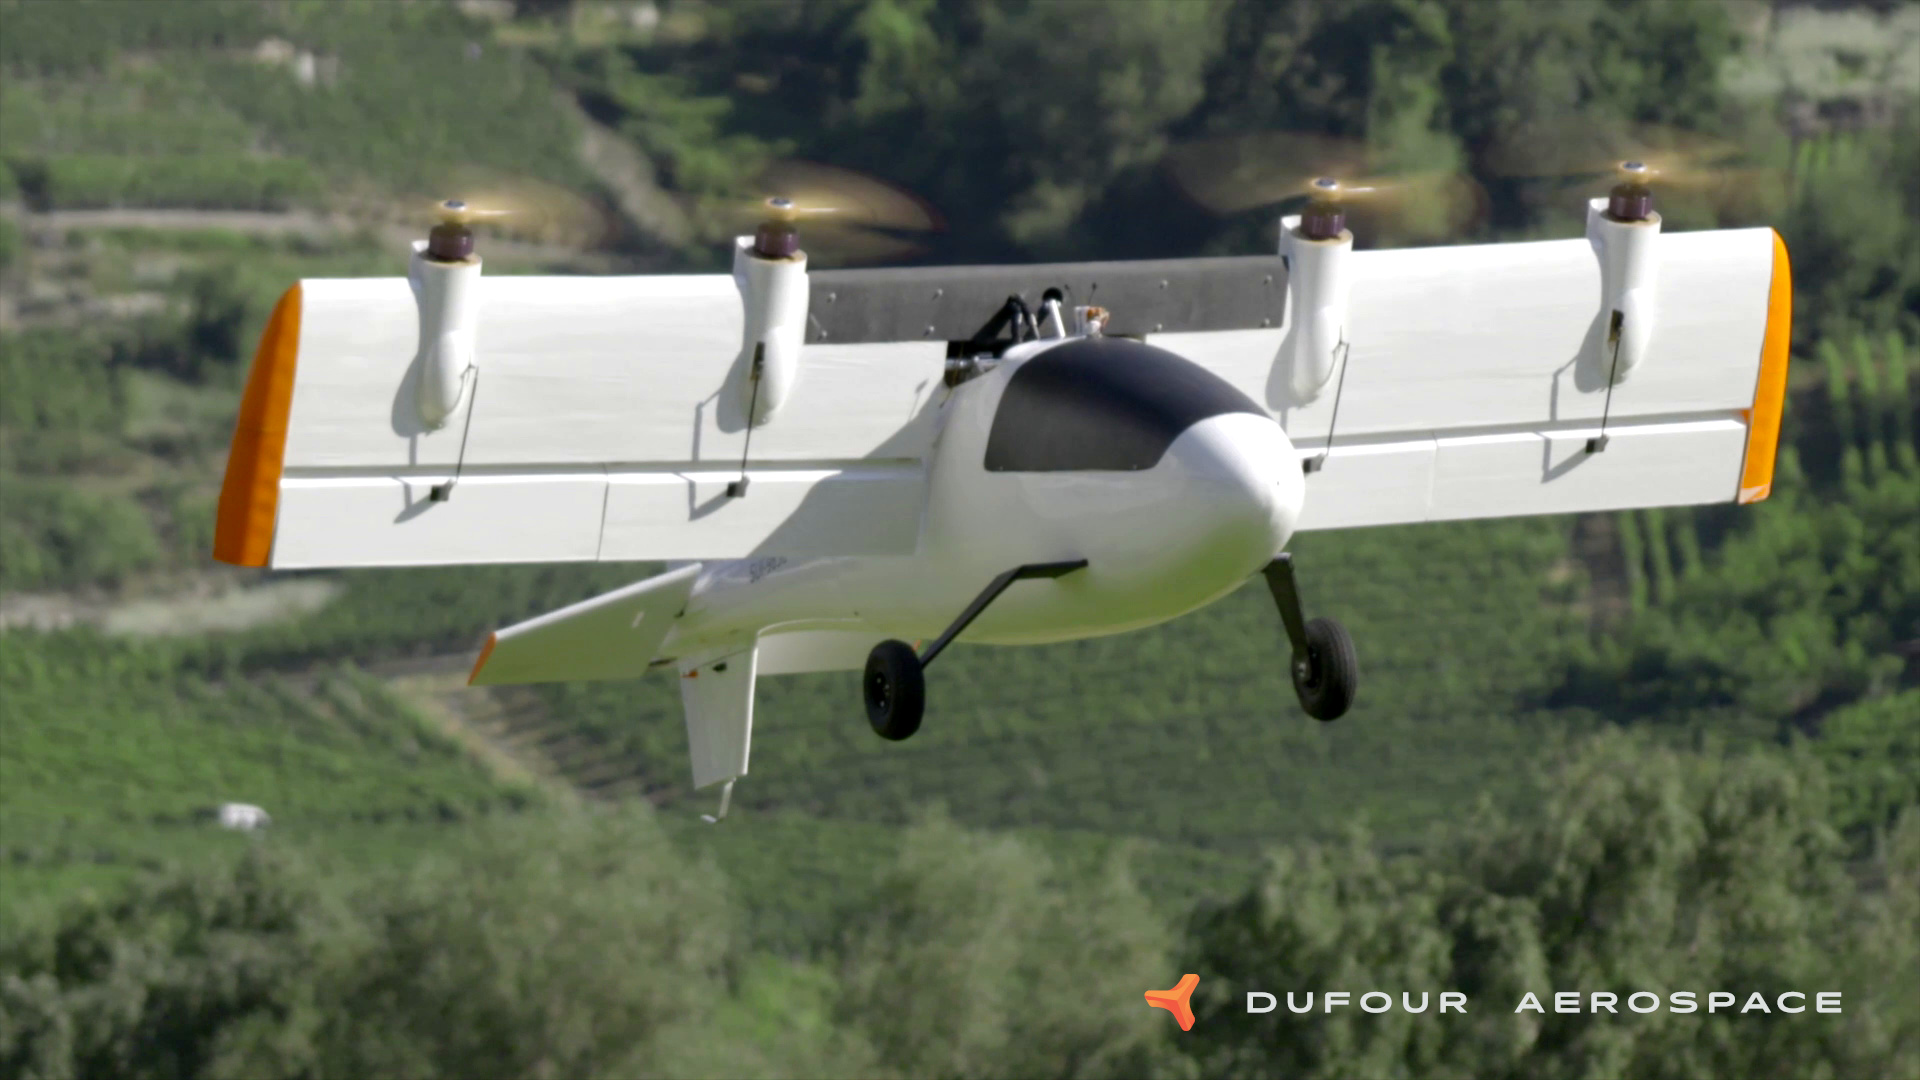 Dufour Aerospace eVTOL project MGM COMPRO cooperation